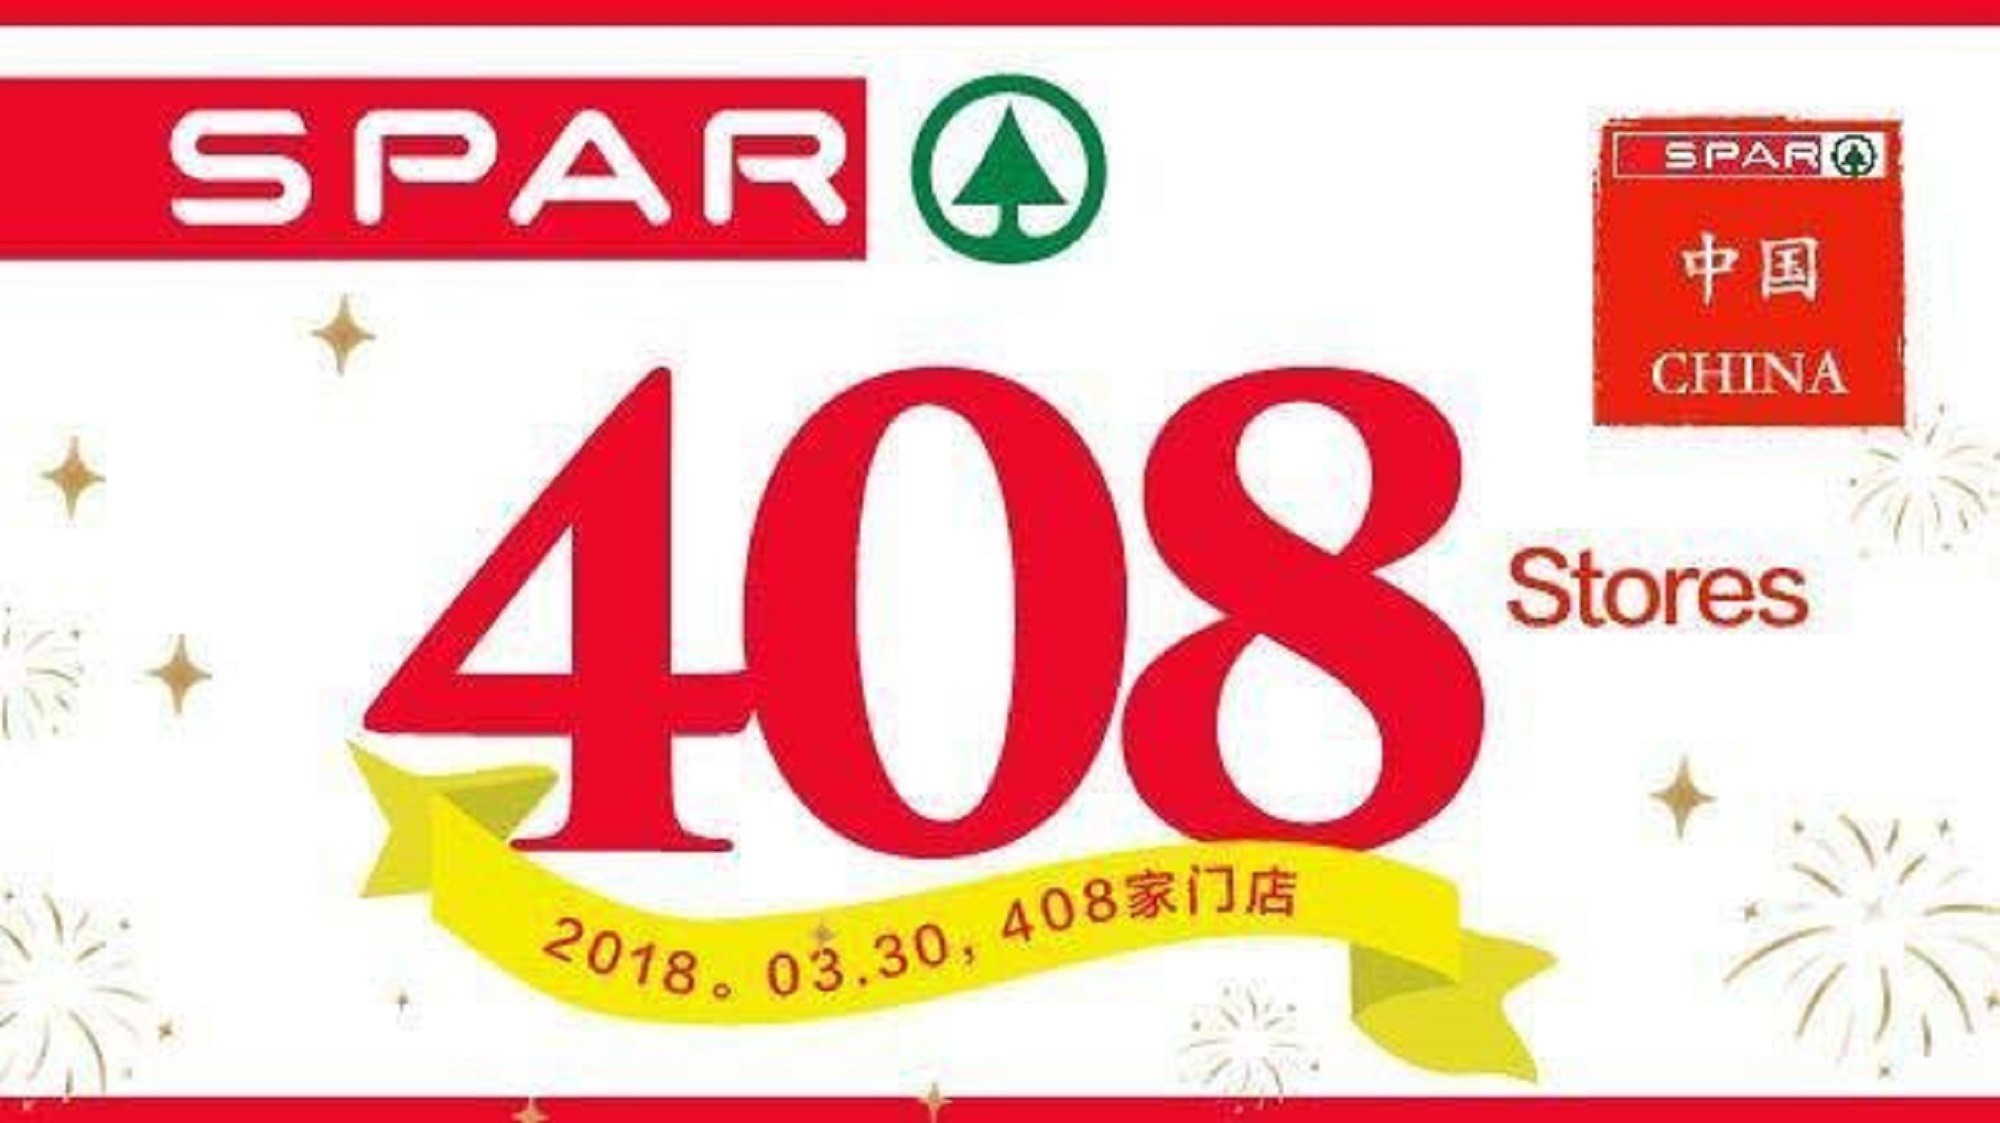 SPAR China 408 Stores in First Quarter 2018